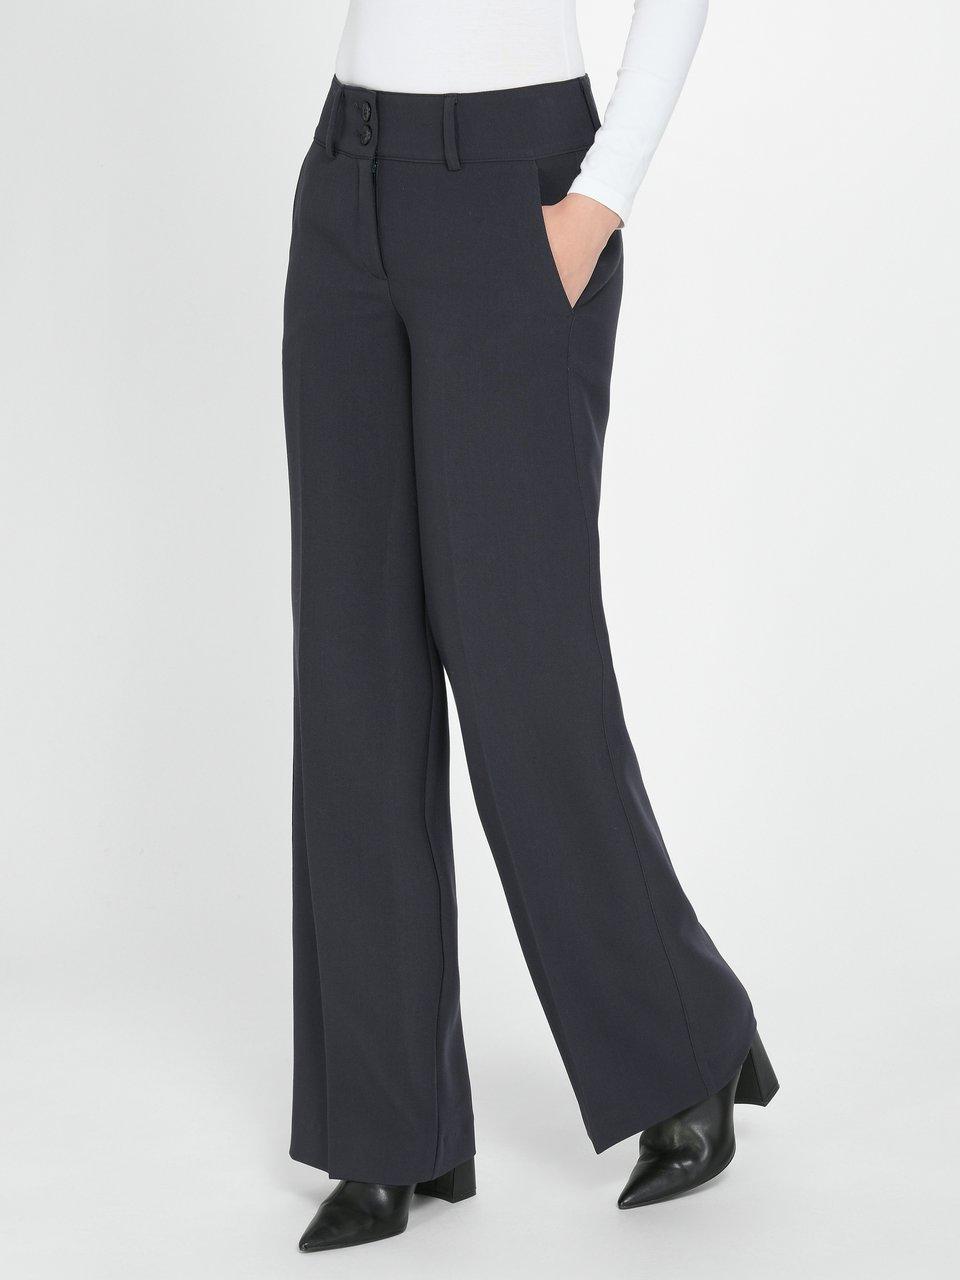 Fadenmeister Berlin - Le pantalon jambes larges